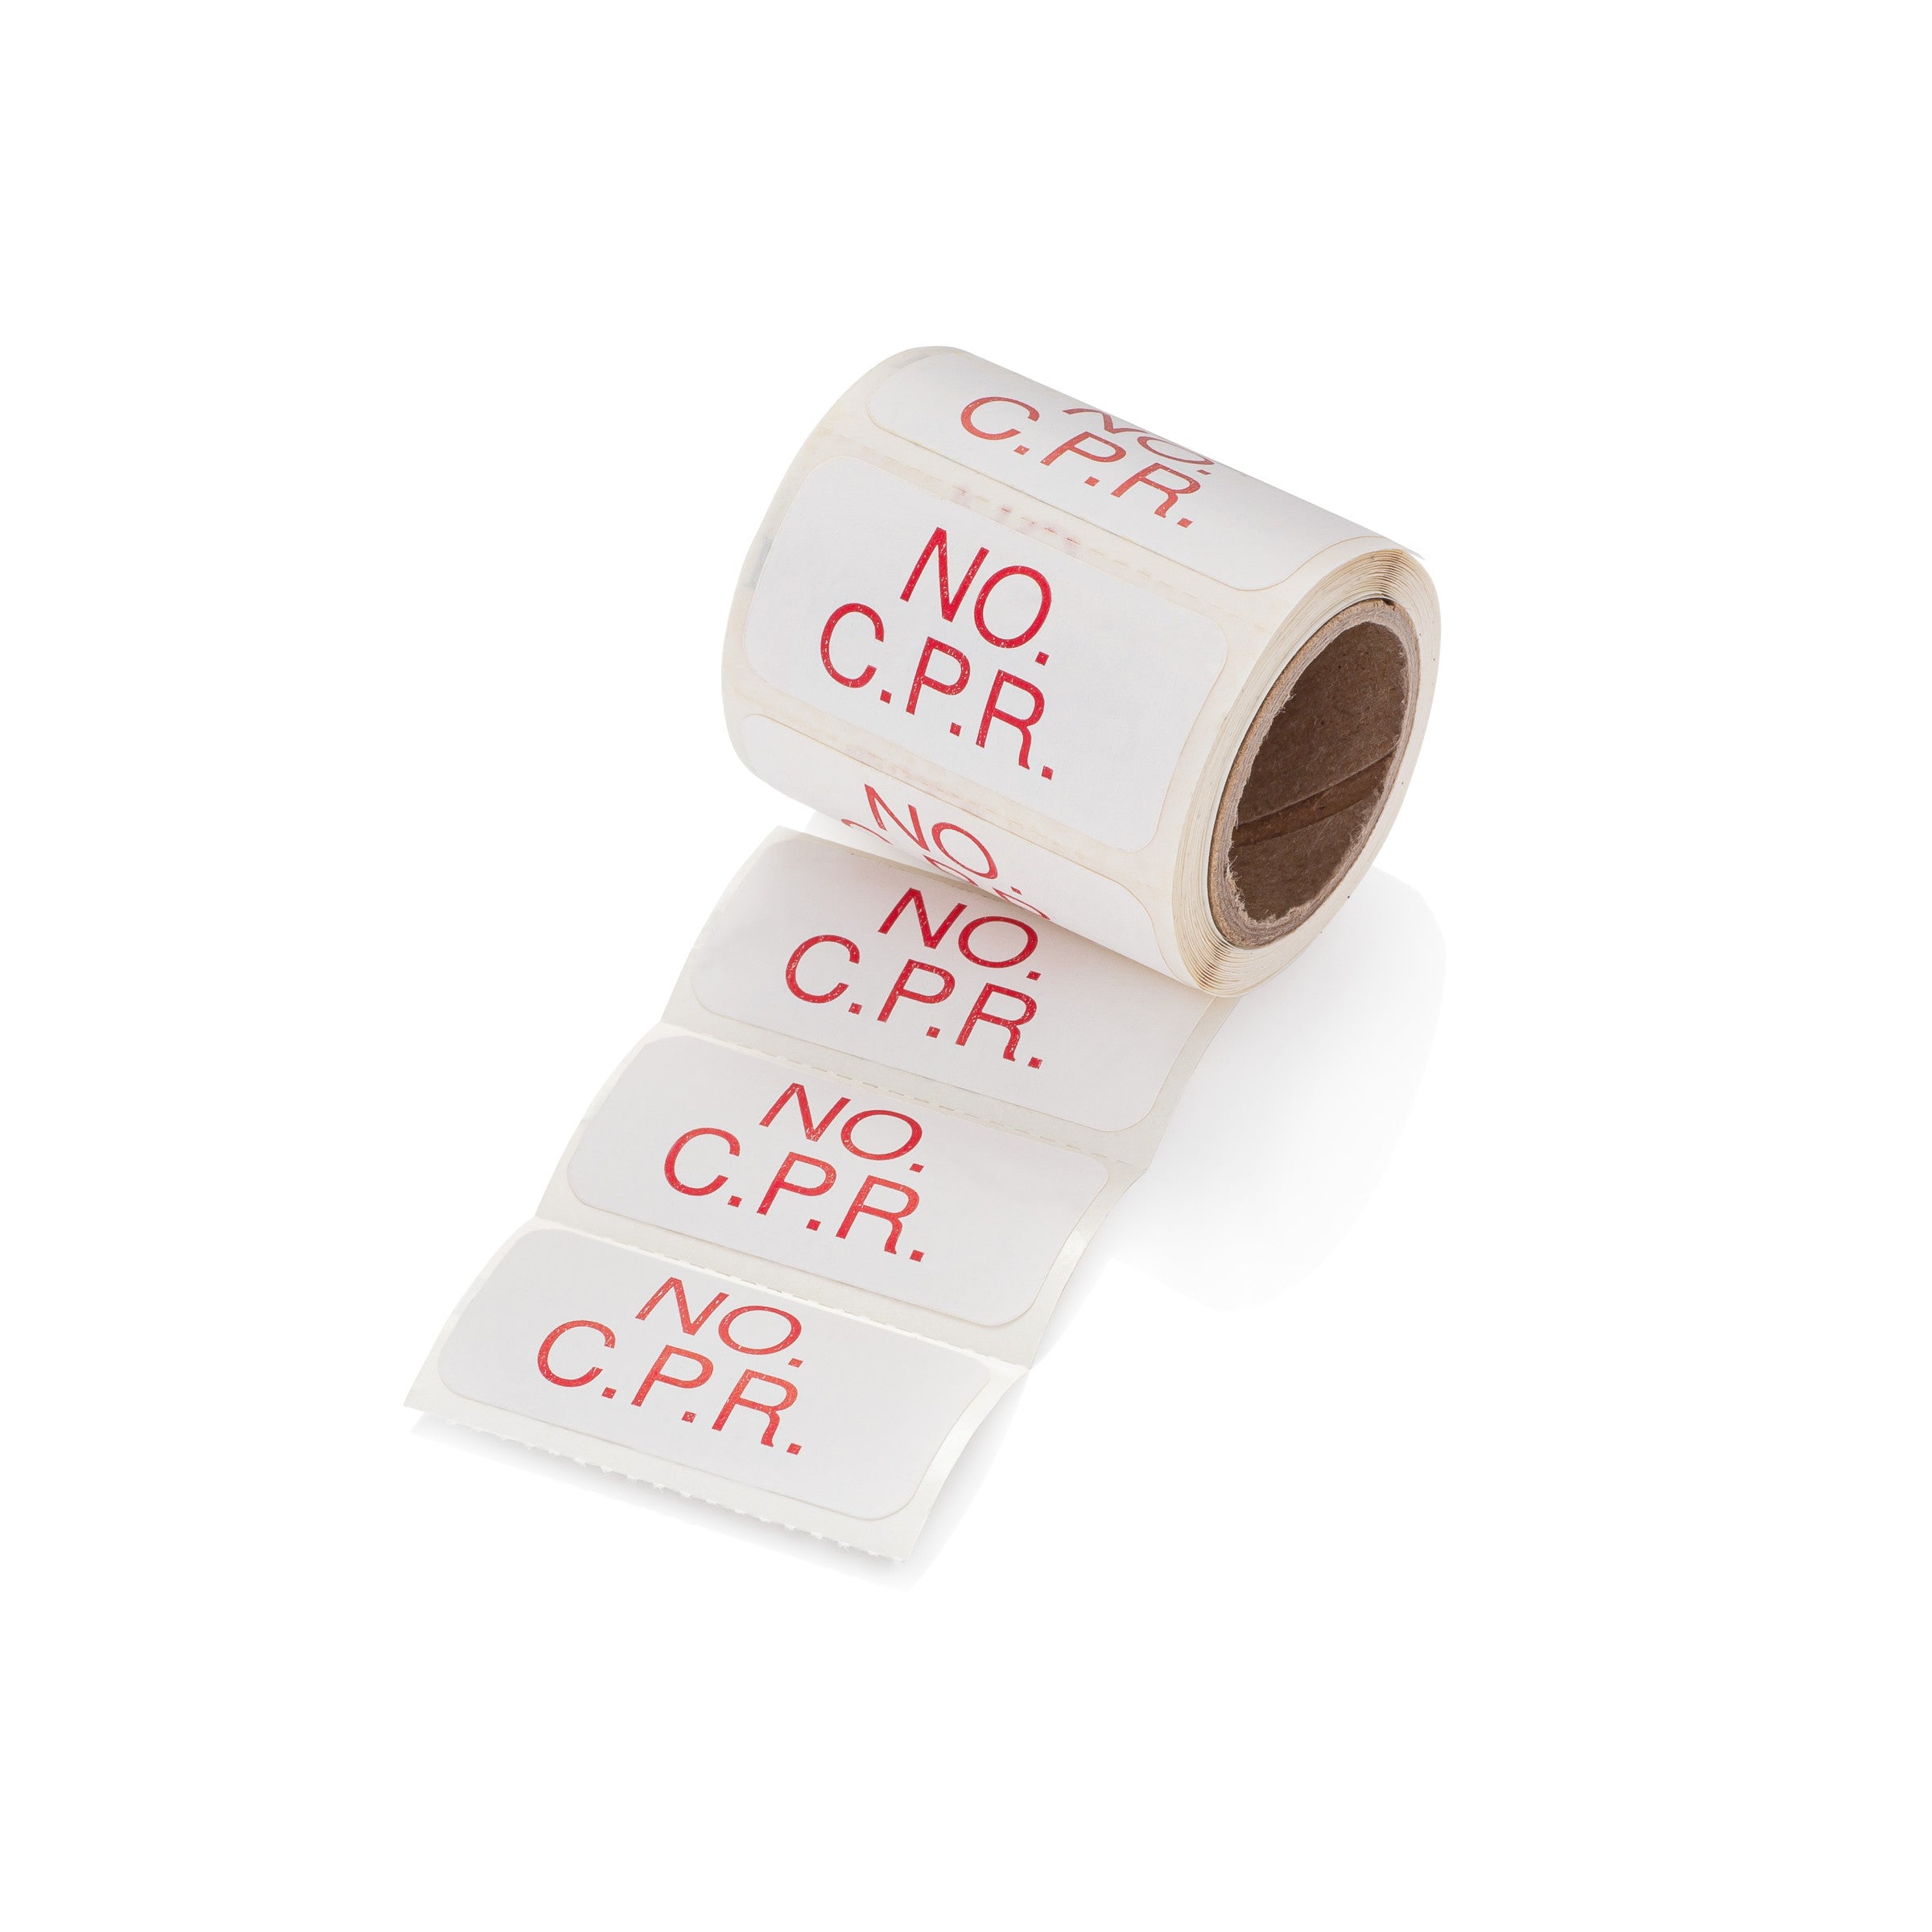 No CPR Alert and Instruction Labels, White, W1.5" x H.75" (Roll of 100)